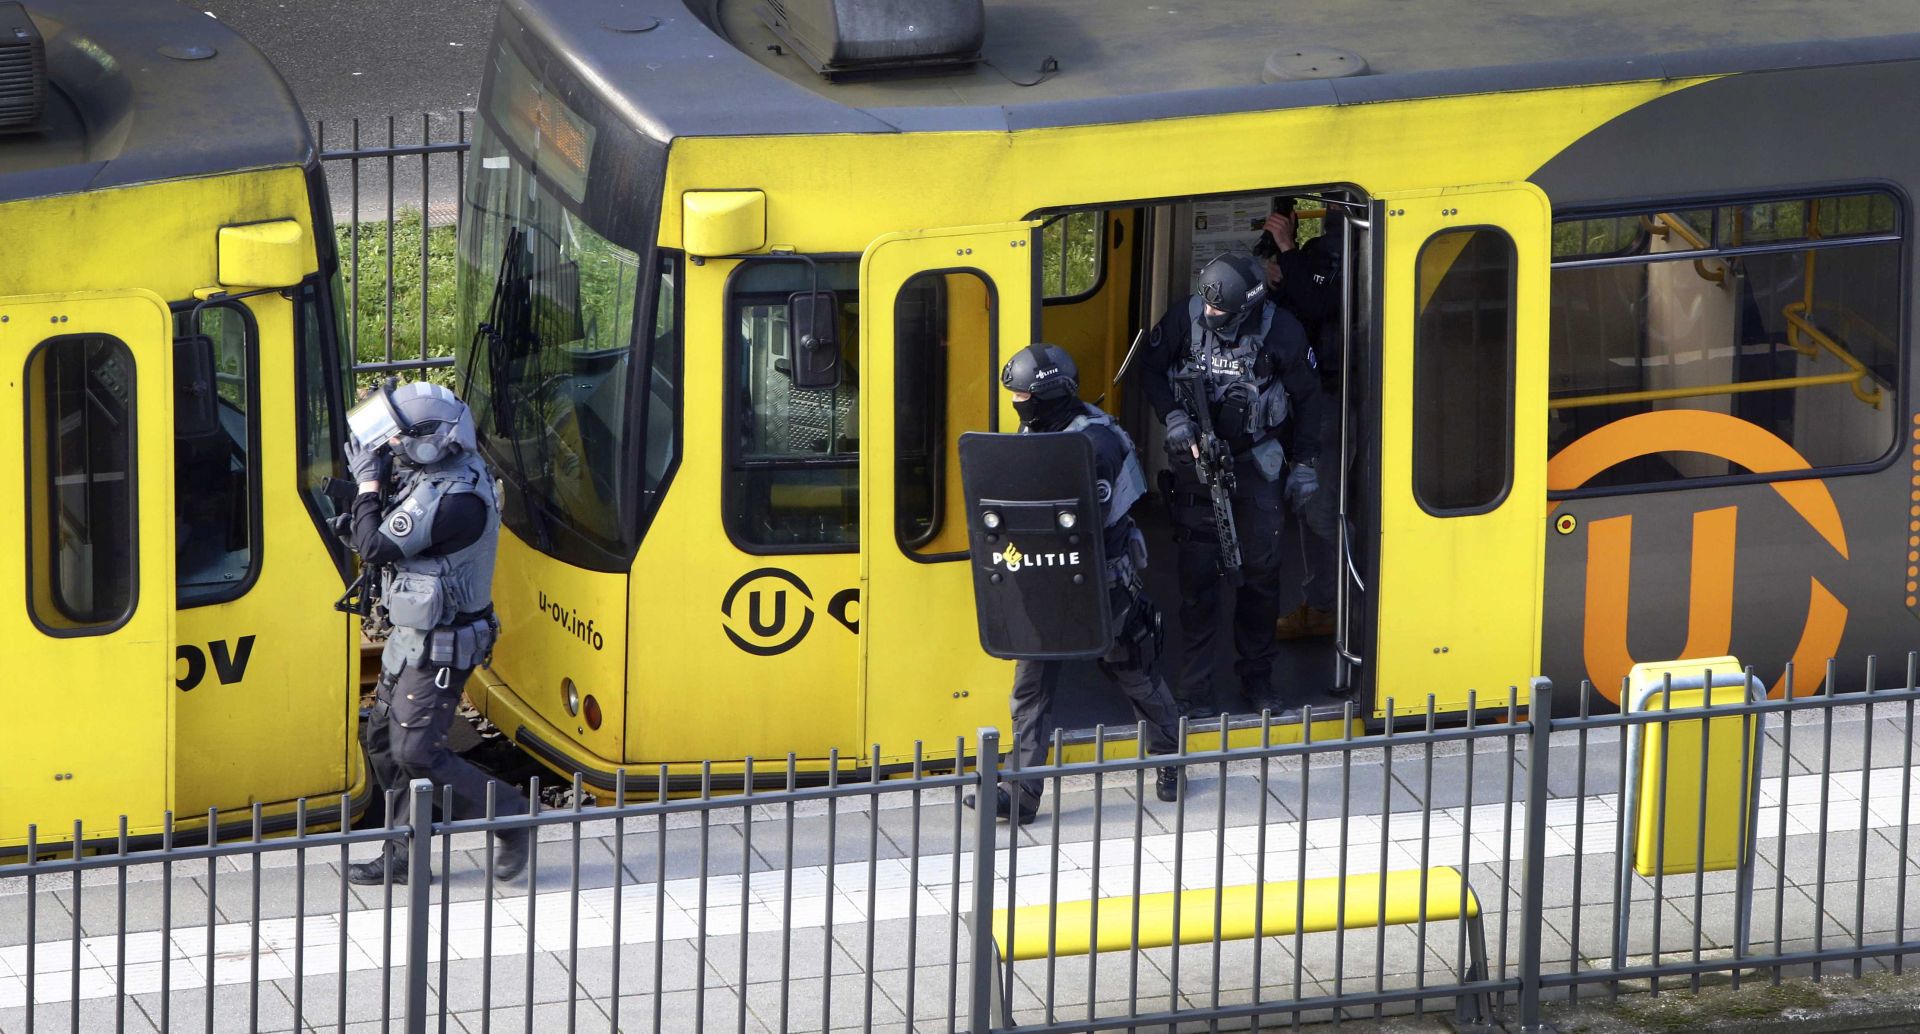 epa07446633 Special Police Forces inspect a tram, after the attack on a tram at the 24 Oktoberplace in Utrecht, The Netherlands, 18 March 2019. According to the the Dutch Police, several people have been injured in a shooting on a tram in the central Dutch city of Utrecht. The perpetrator is still at large.  EPA/RICARDO SMIT